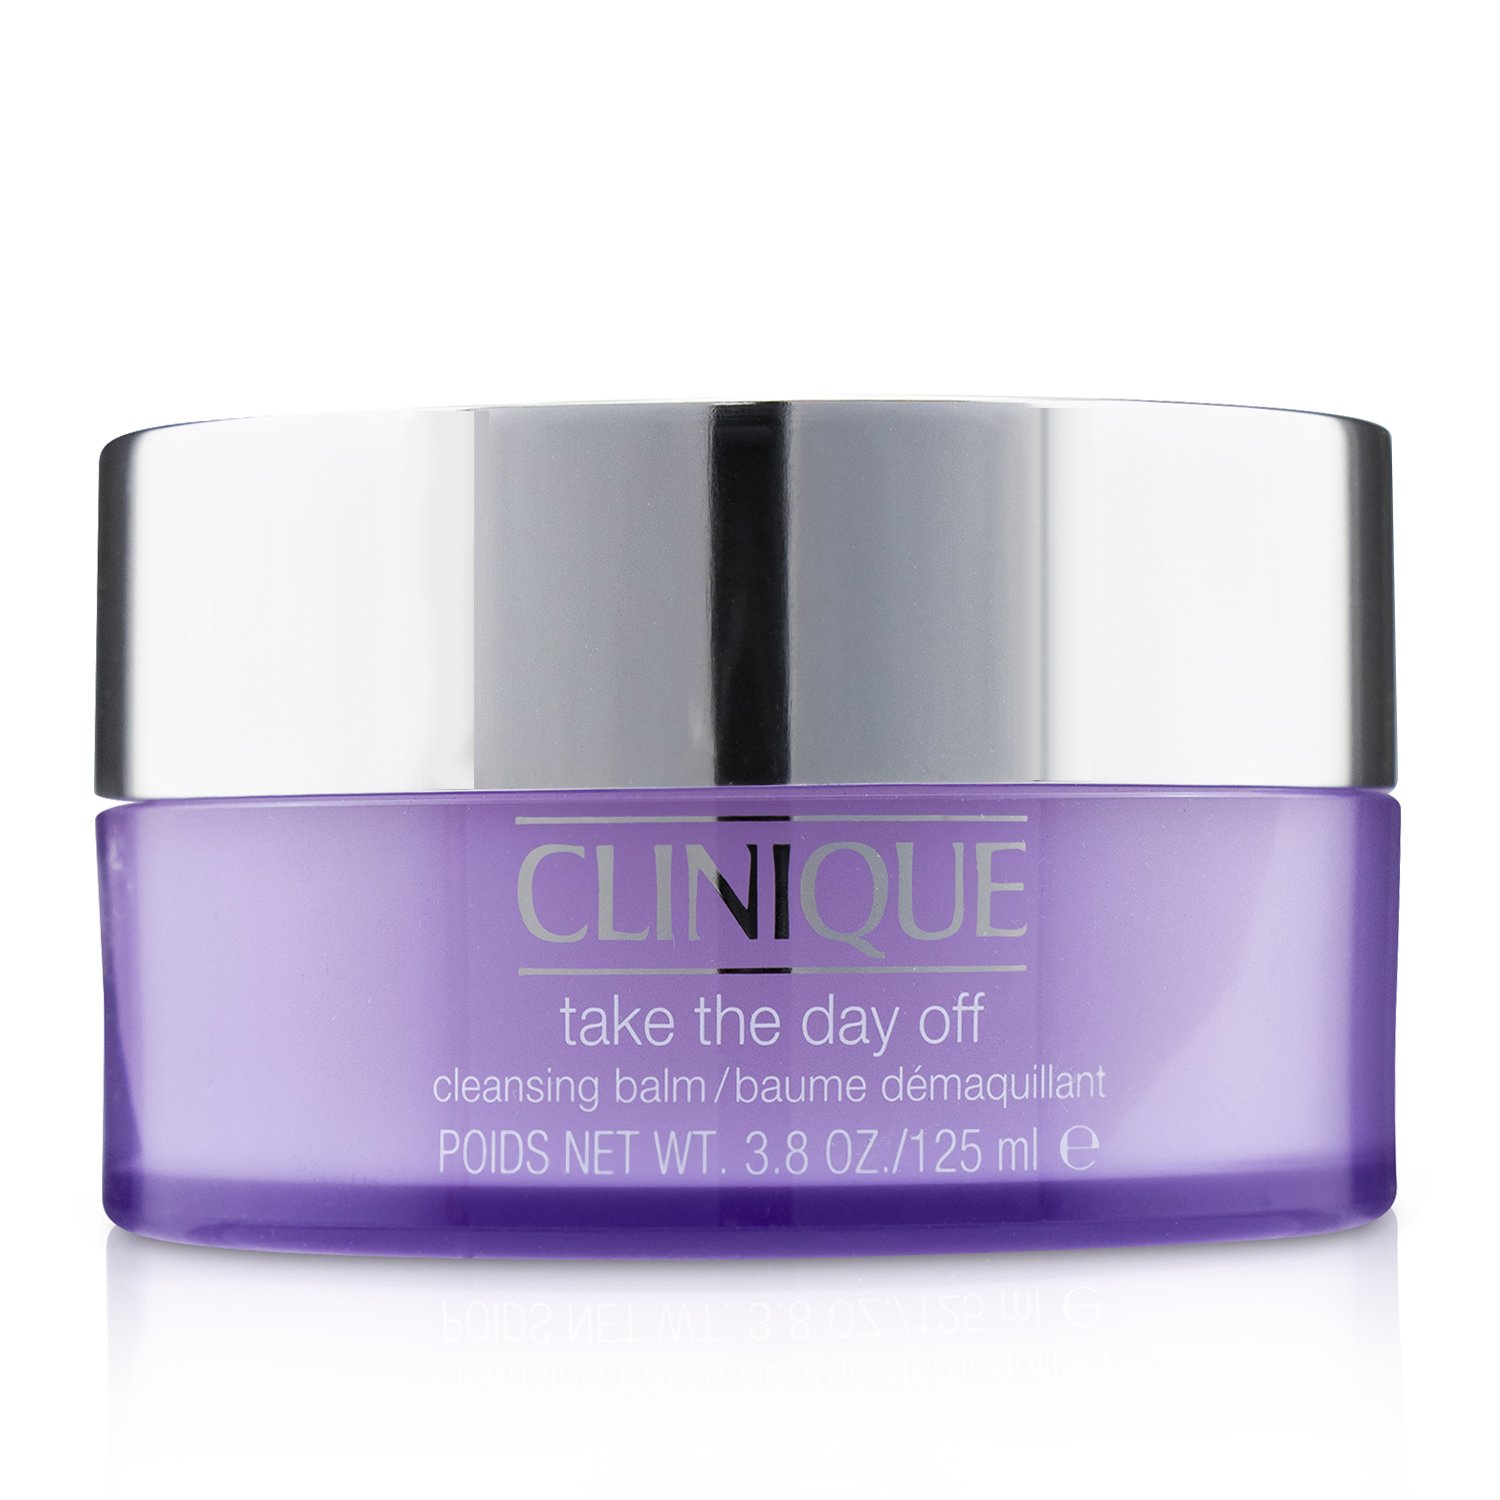 Take the day off cleansing. Clinique Cleansing Balm. Clinique take the Day off Cleansing Balm. Clinique take the Day off бальзам. Clinique take the Day off Cleansing.